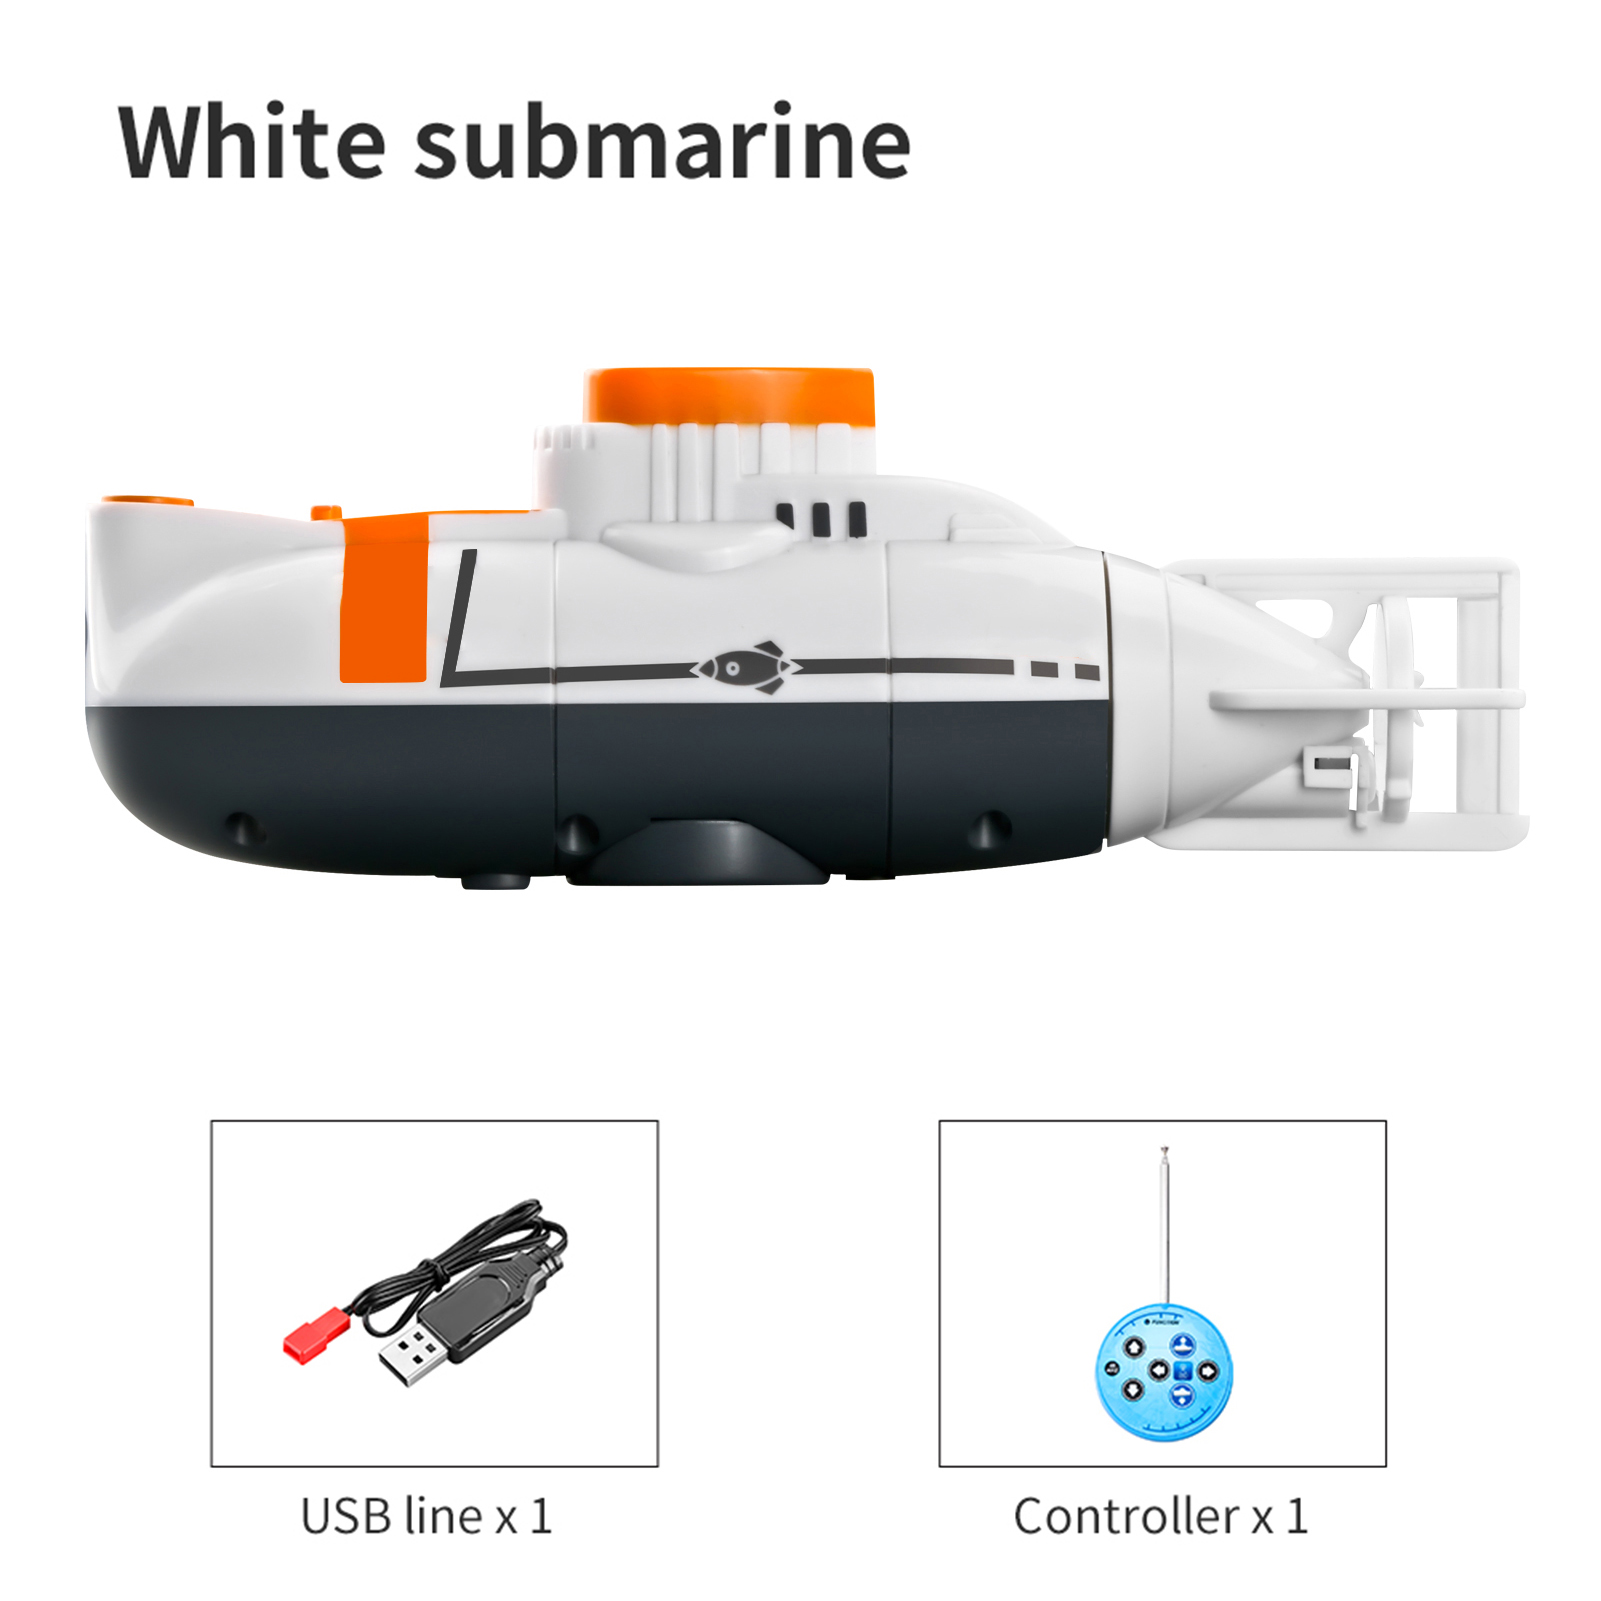 RC Submarine 0.1m/s Speed Remote Control Boat Waterproof Children's Diving Fish Tank Toy Mini Military Simulation Model for GiftType:Black